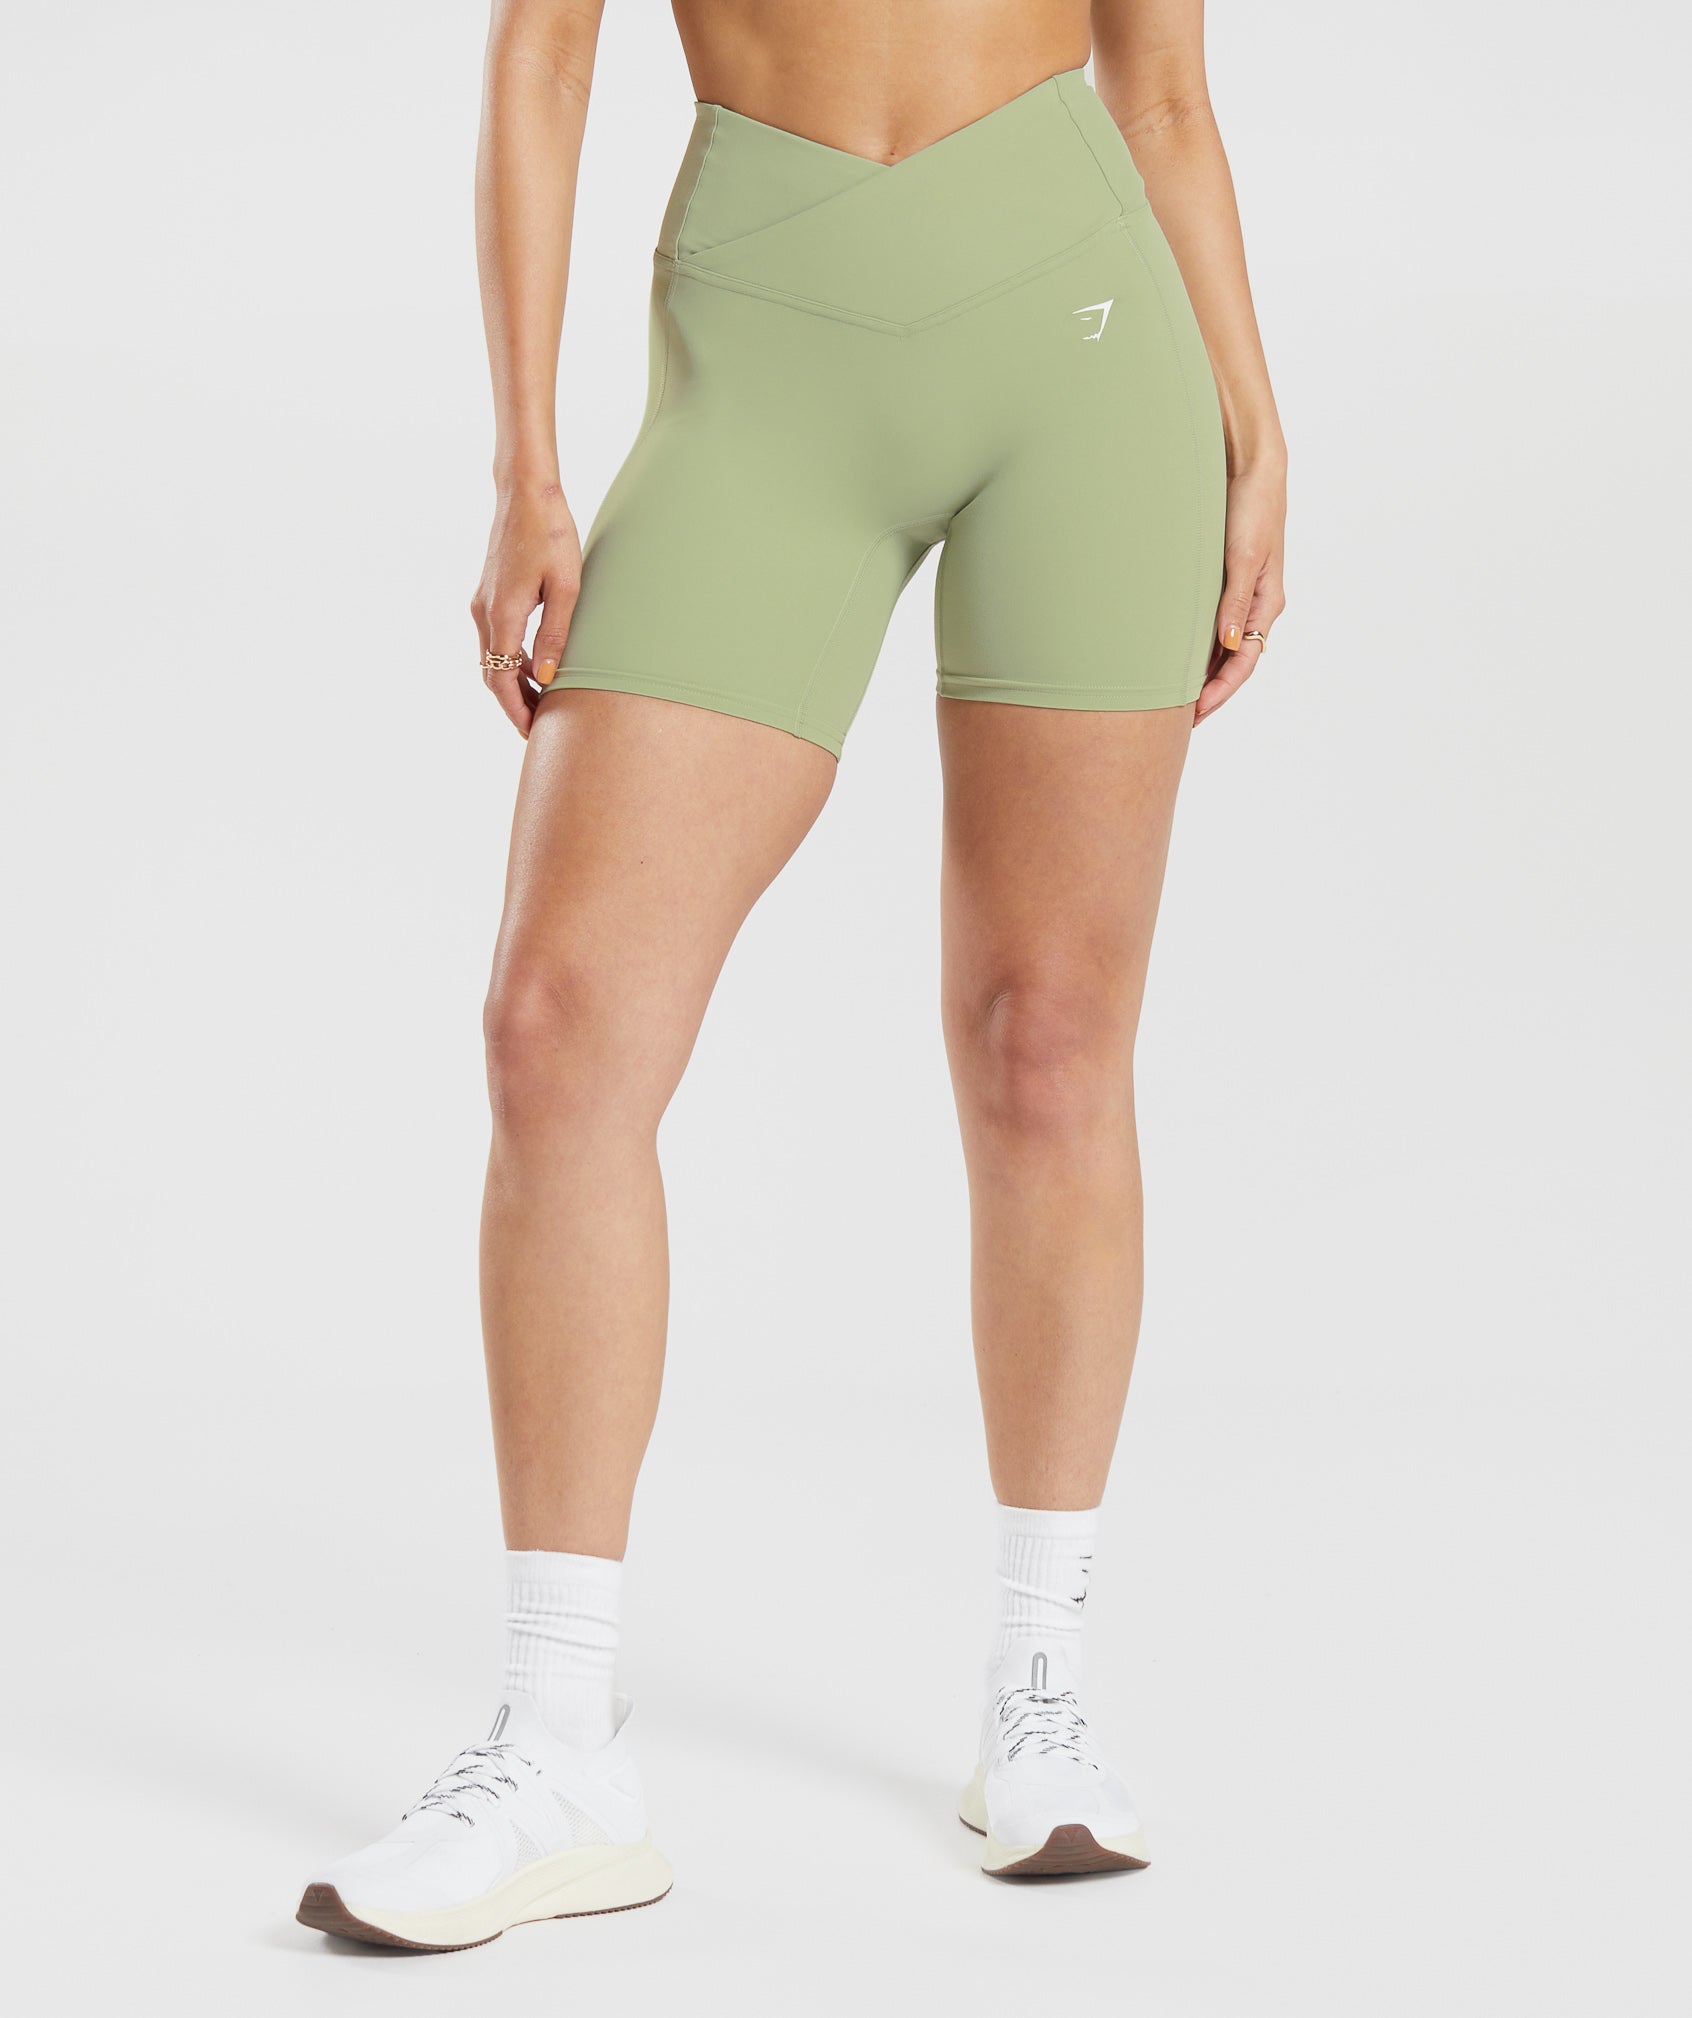 Holy Cross Ladies Gym Shorts (Final Sale)